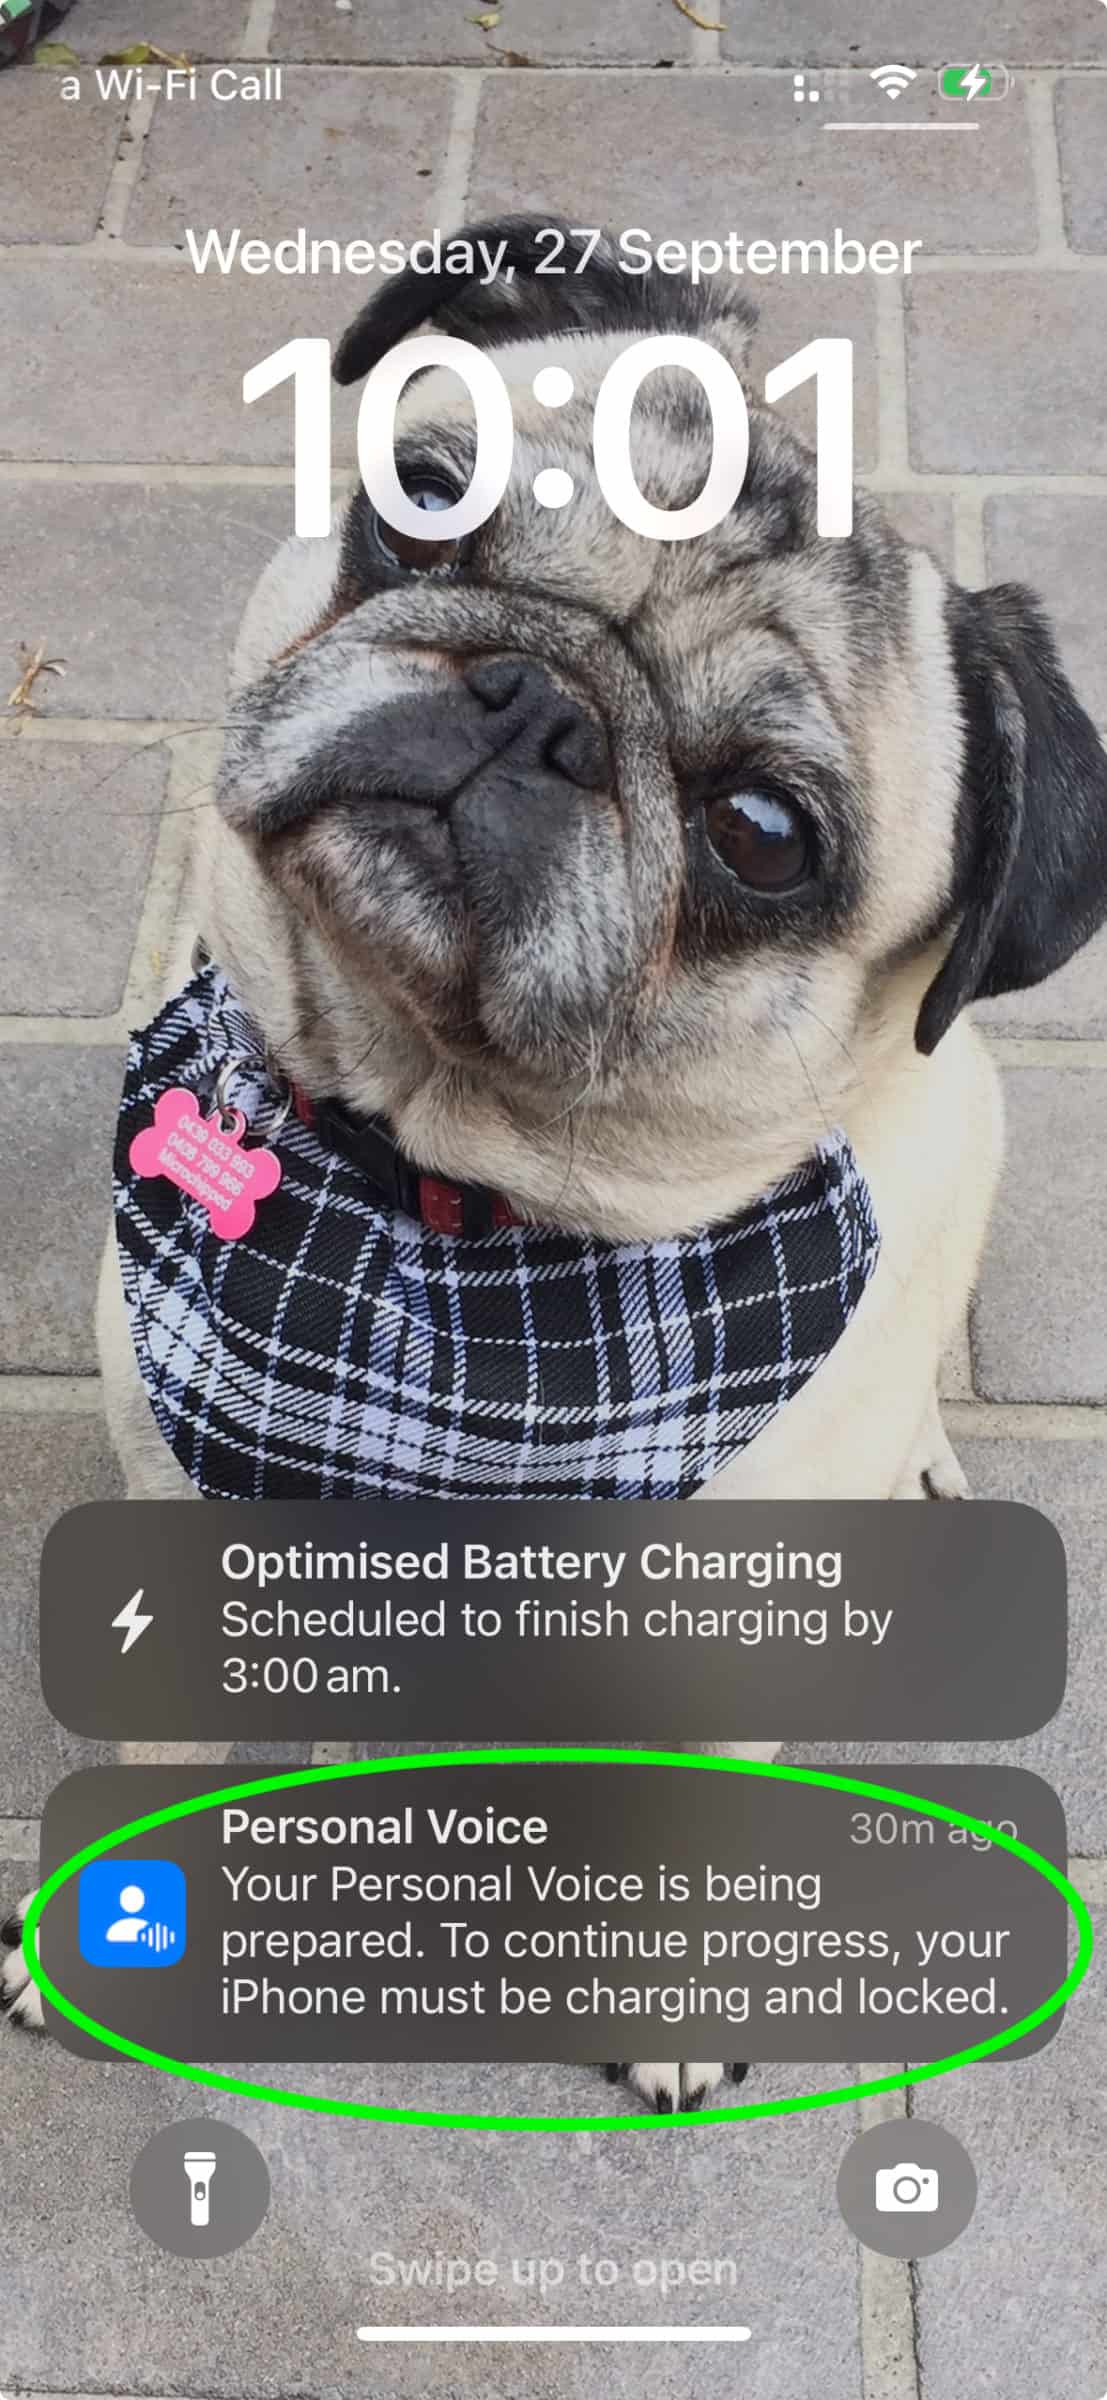 A screenshot of an iPhone on lock screen with a notification stating that "Your Personal Voice is being prepared. To continue progress, your iPhone must be charging and locked."